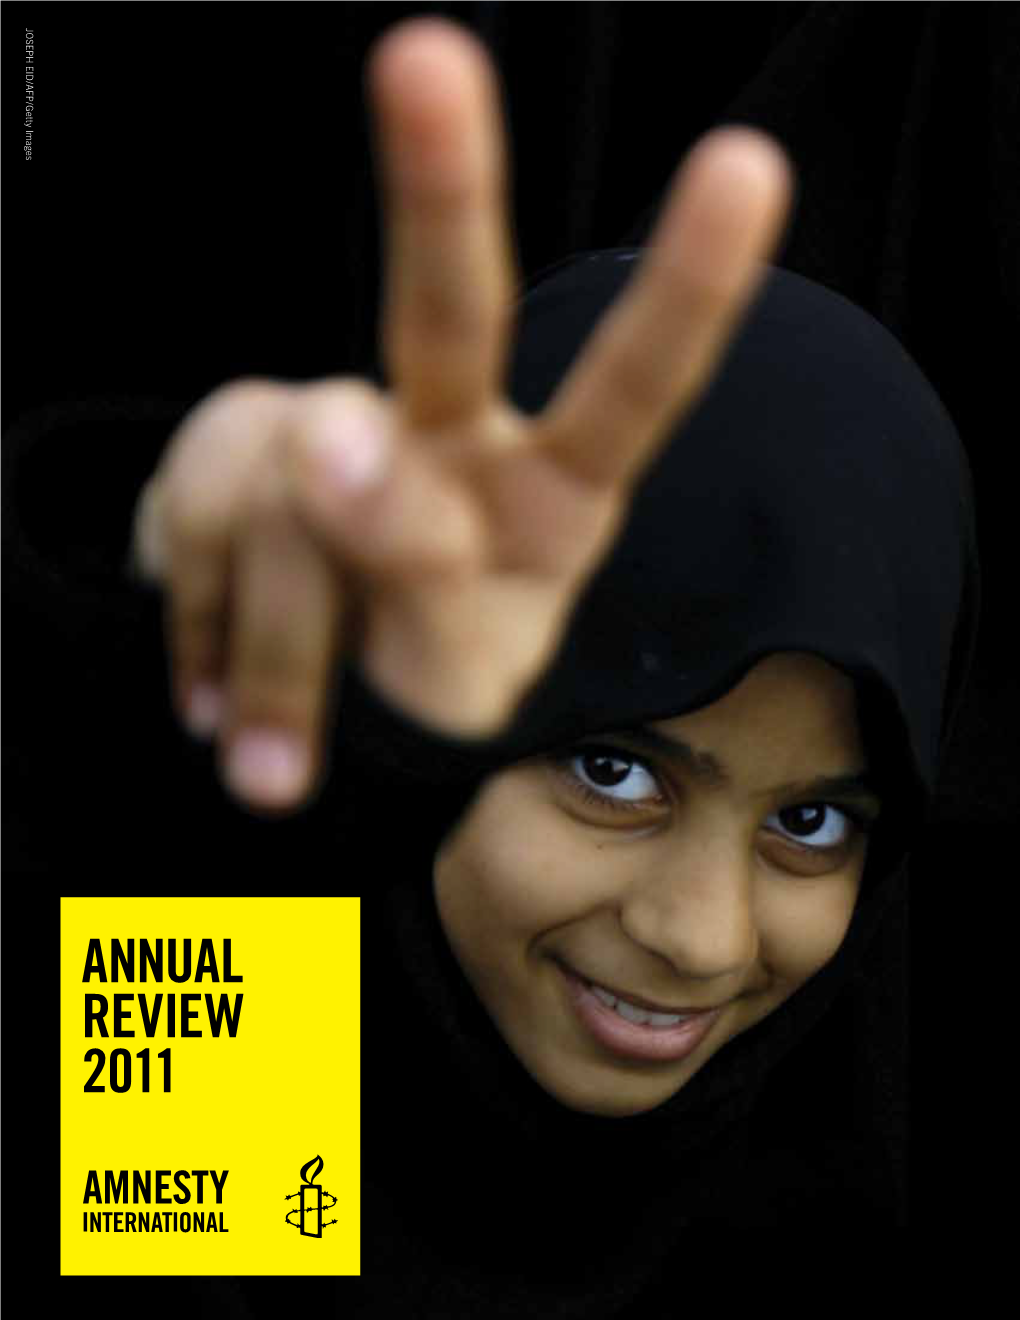 Annual Review 2011 Amnesty International’S Mission Amnesty International Is a Worldwide Movement of People Dedicated to the Protection and Promotion of Human Rights